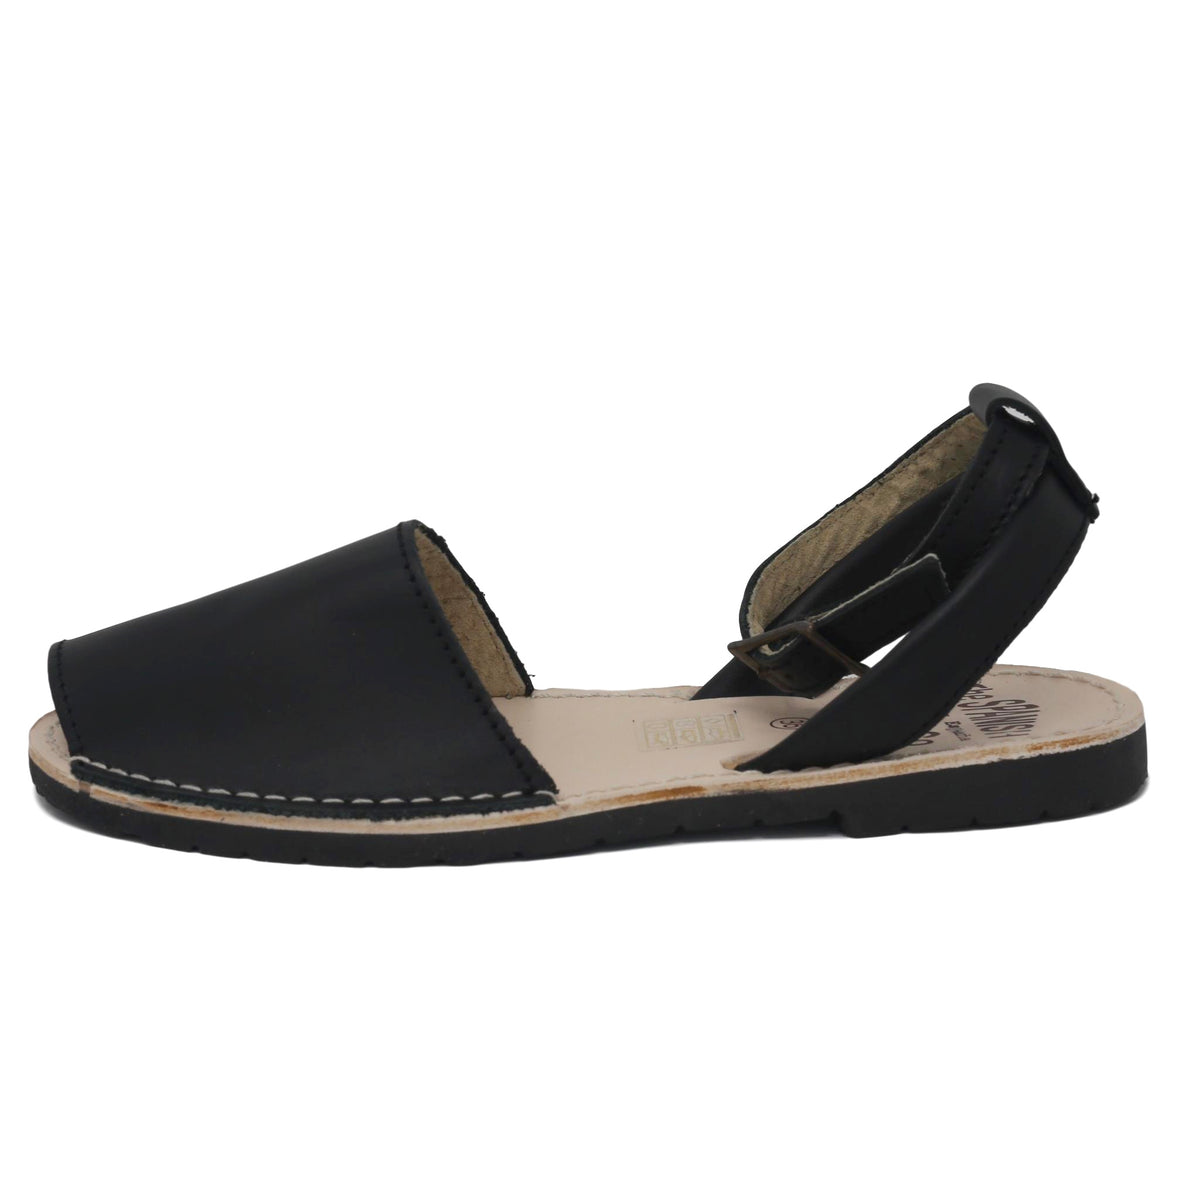 Black sandals with strap - The Spanish Sandal Company